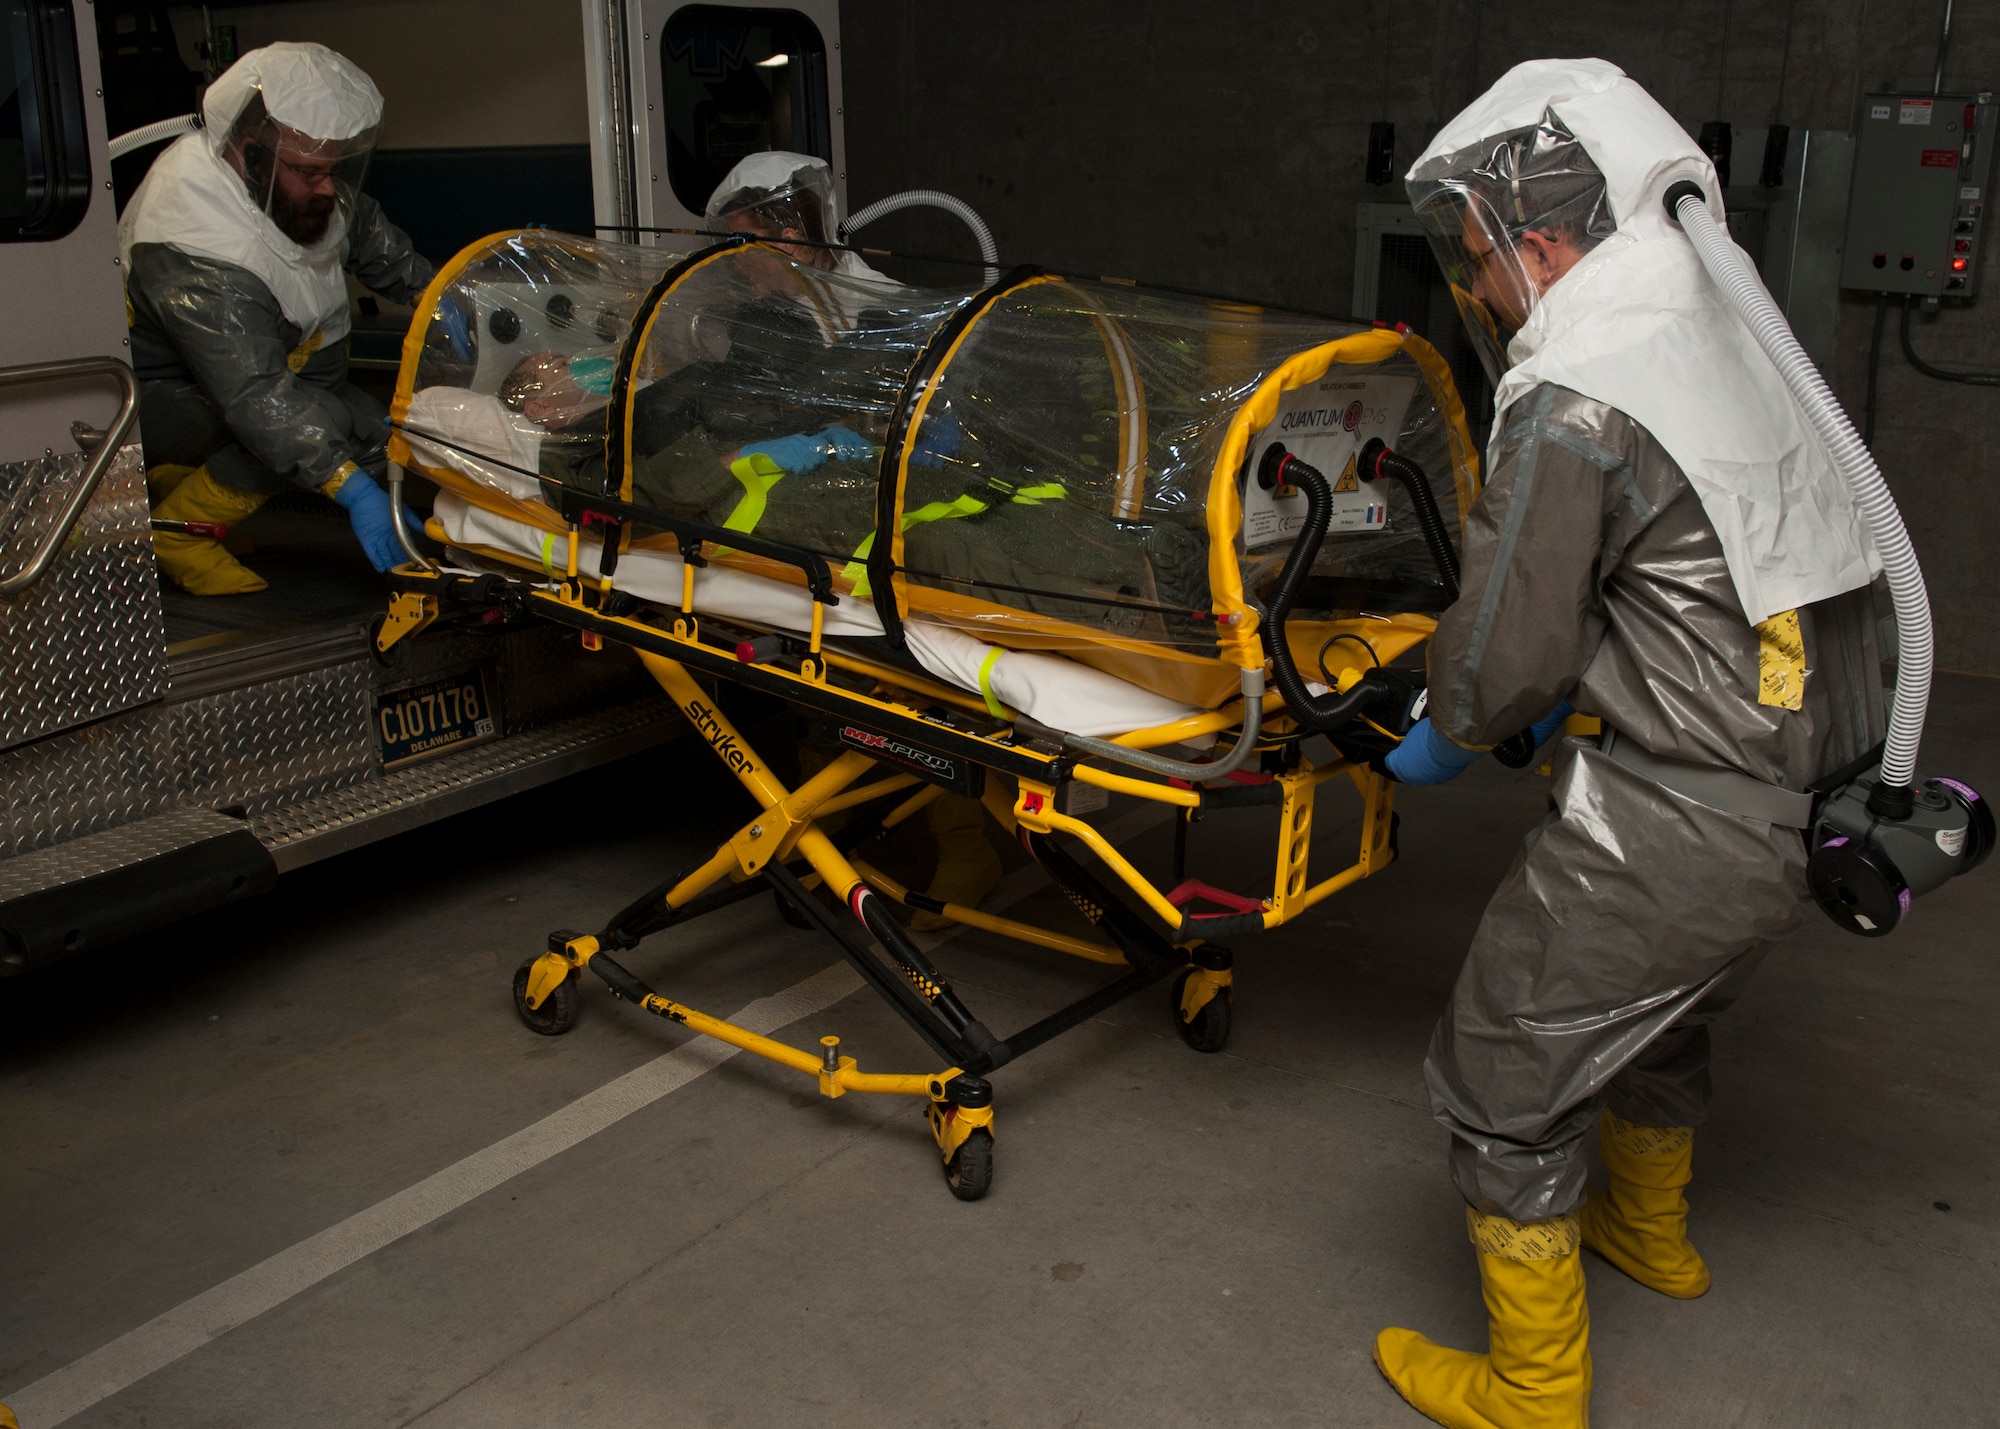 Brett Zingarelli, Brittany Farra and Dave Brown, St. Francis Healthcare emergency medical technicians, move a single patient bio-containment unit (isolation pod) carrying Senior Airman Peter Cannizzaro, 9th Airlift Squadron loadmaster, out of an ambulance Nov. 3, 2015, at Wilmington Hospital in Wilmington, Del. Zingarelli, Farra and Brown are part of a special operations team that is designed to safely transport highly infectious patients. (U.S. Air Force photo/Senior Airman Zachary Cacicia)